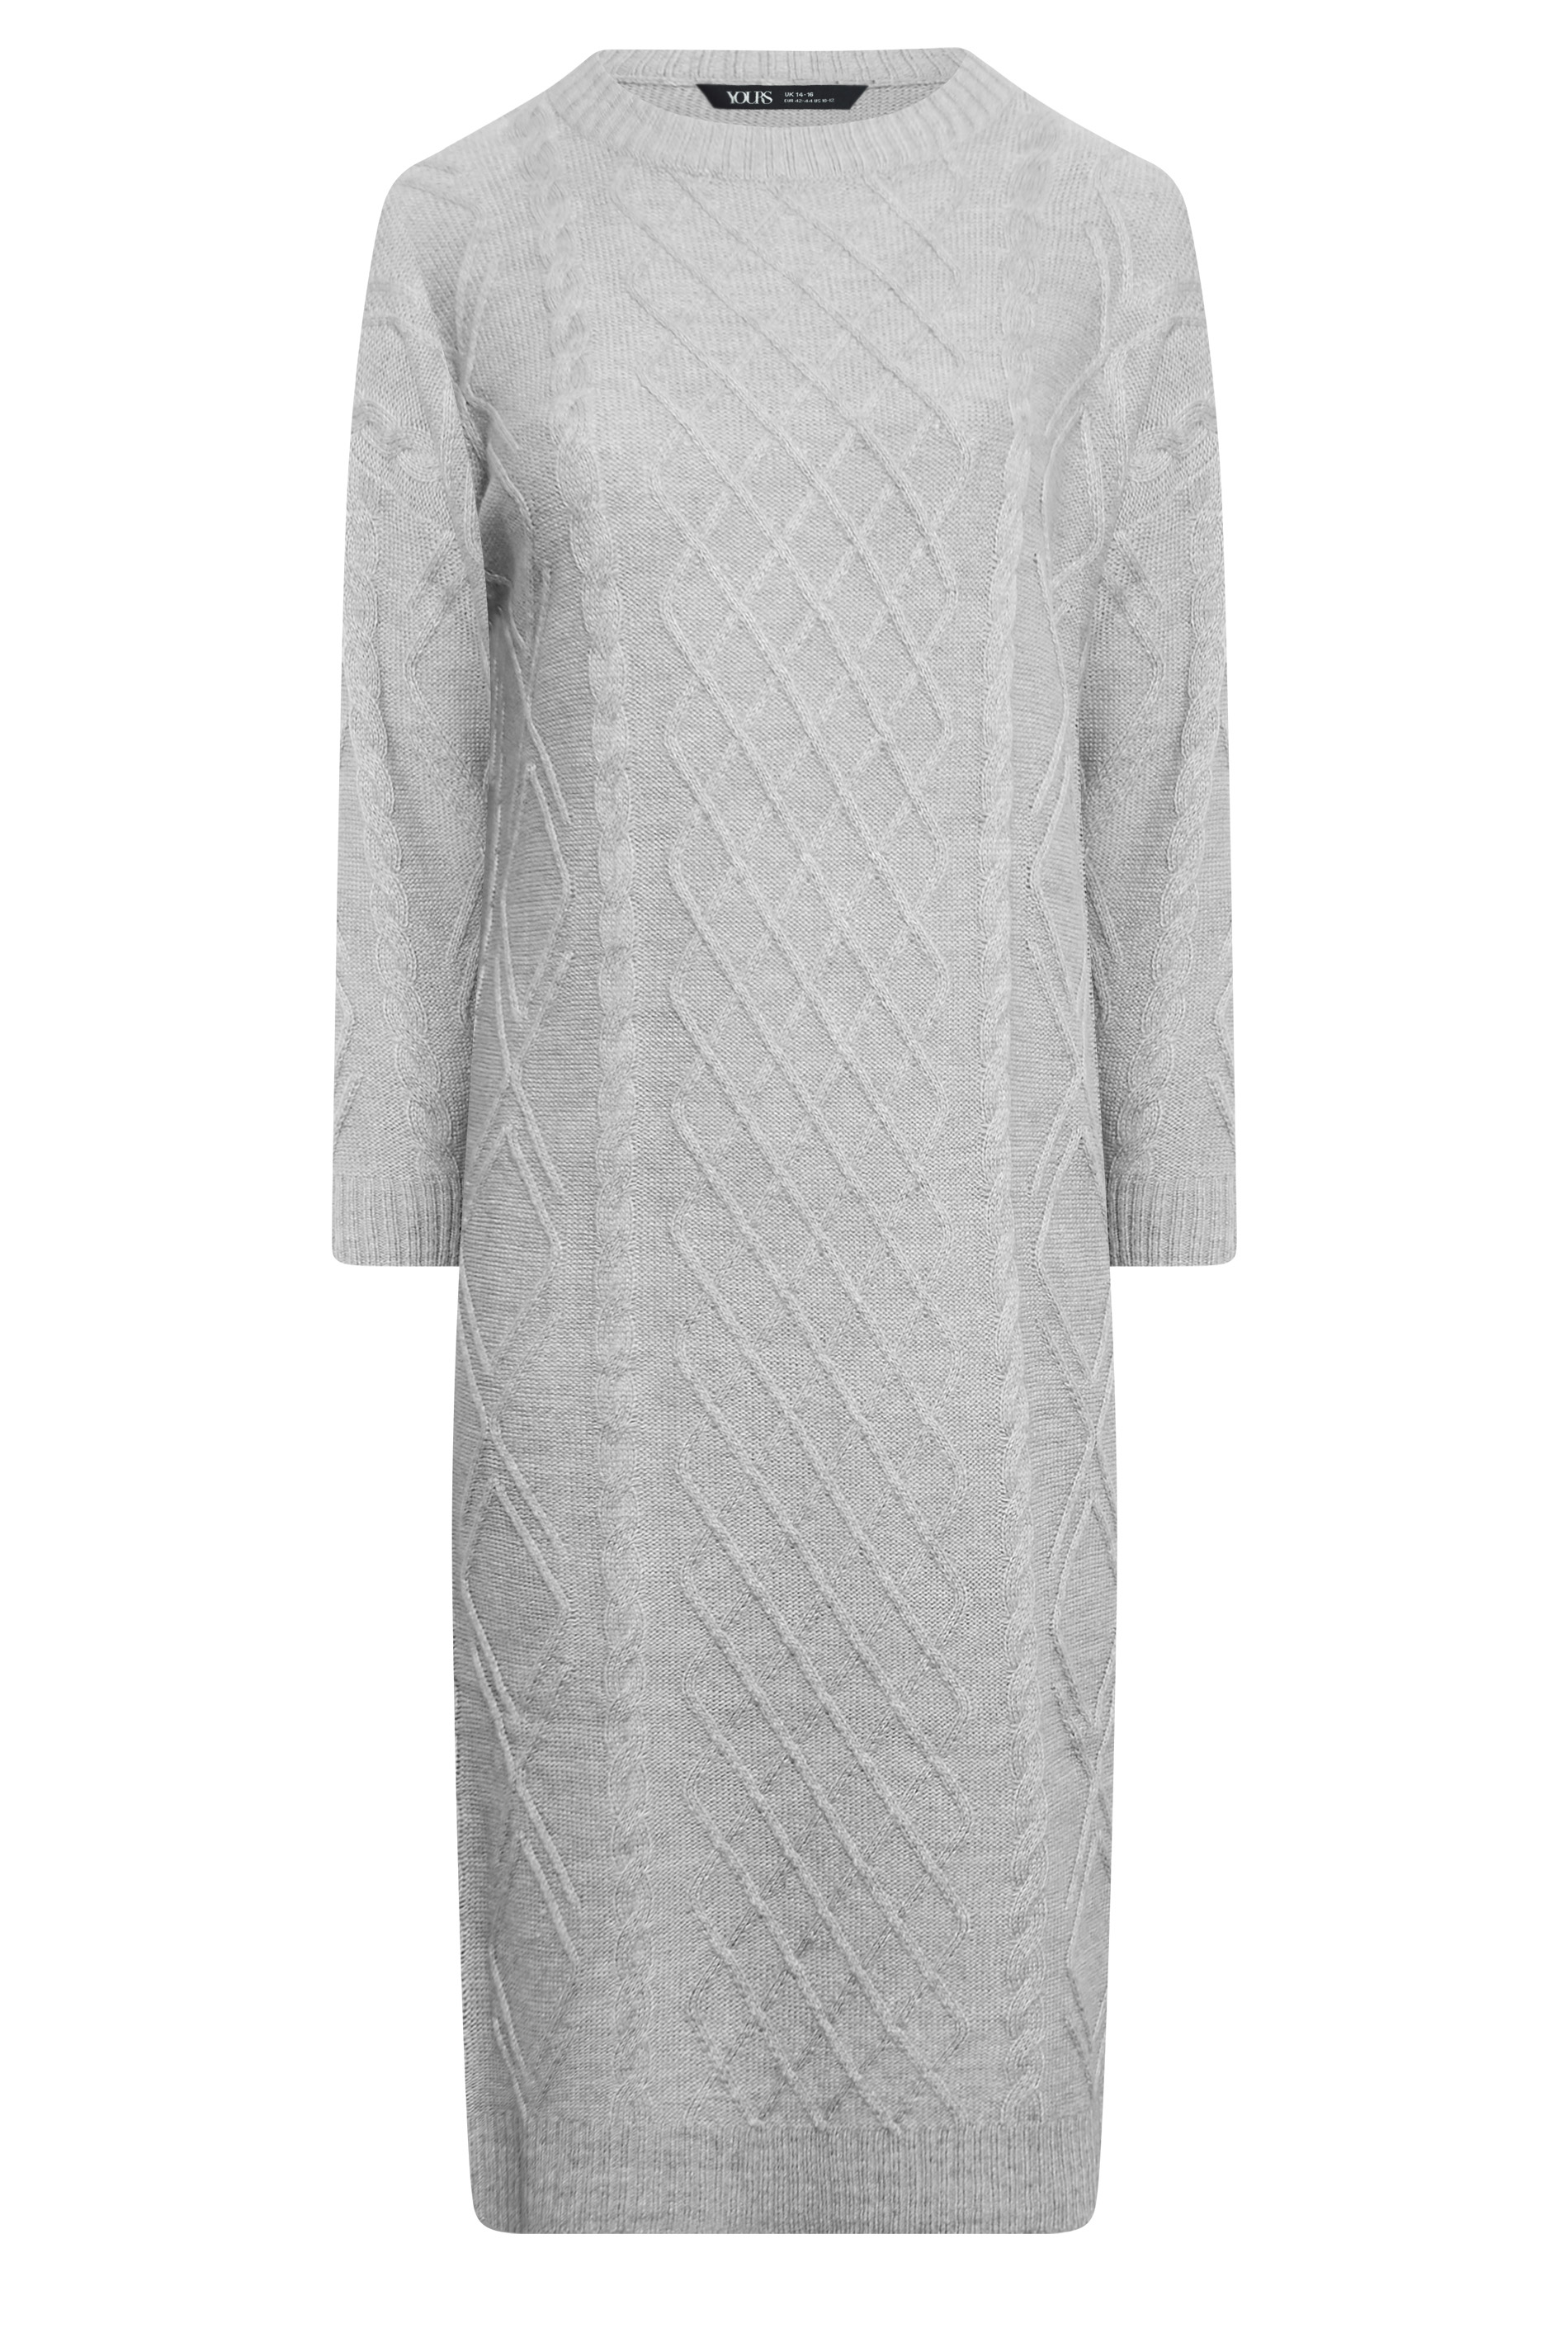 YOURS Plus Size Grey Cable Knit Midi Jumper Dress